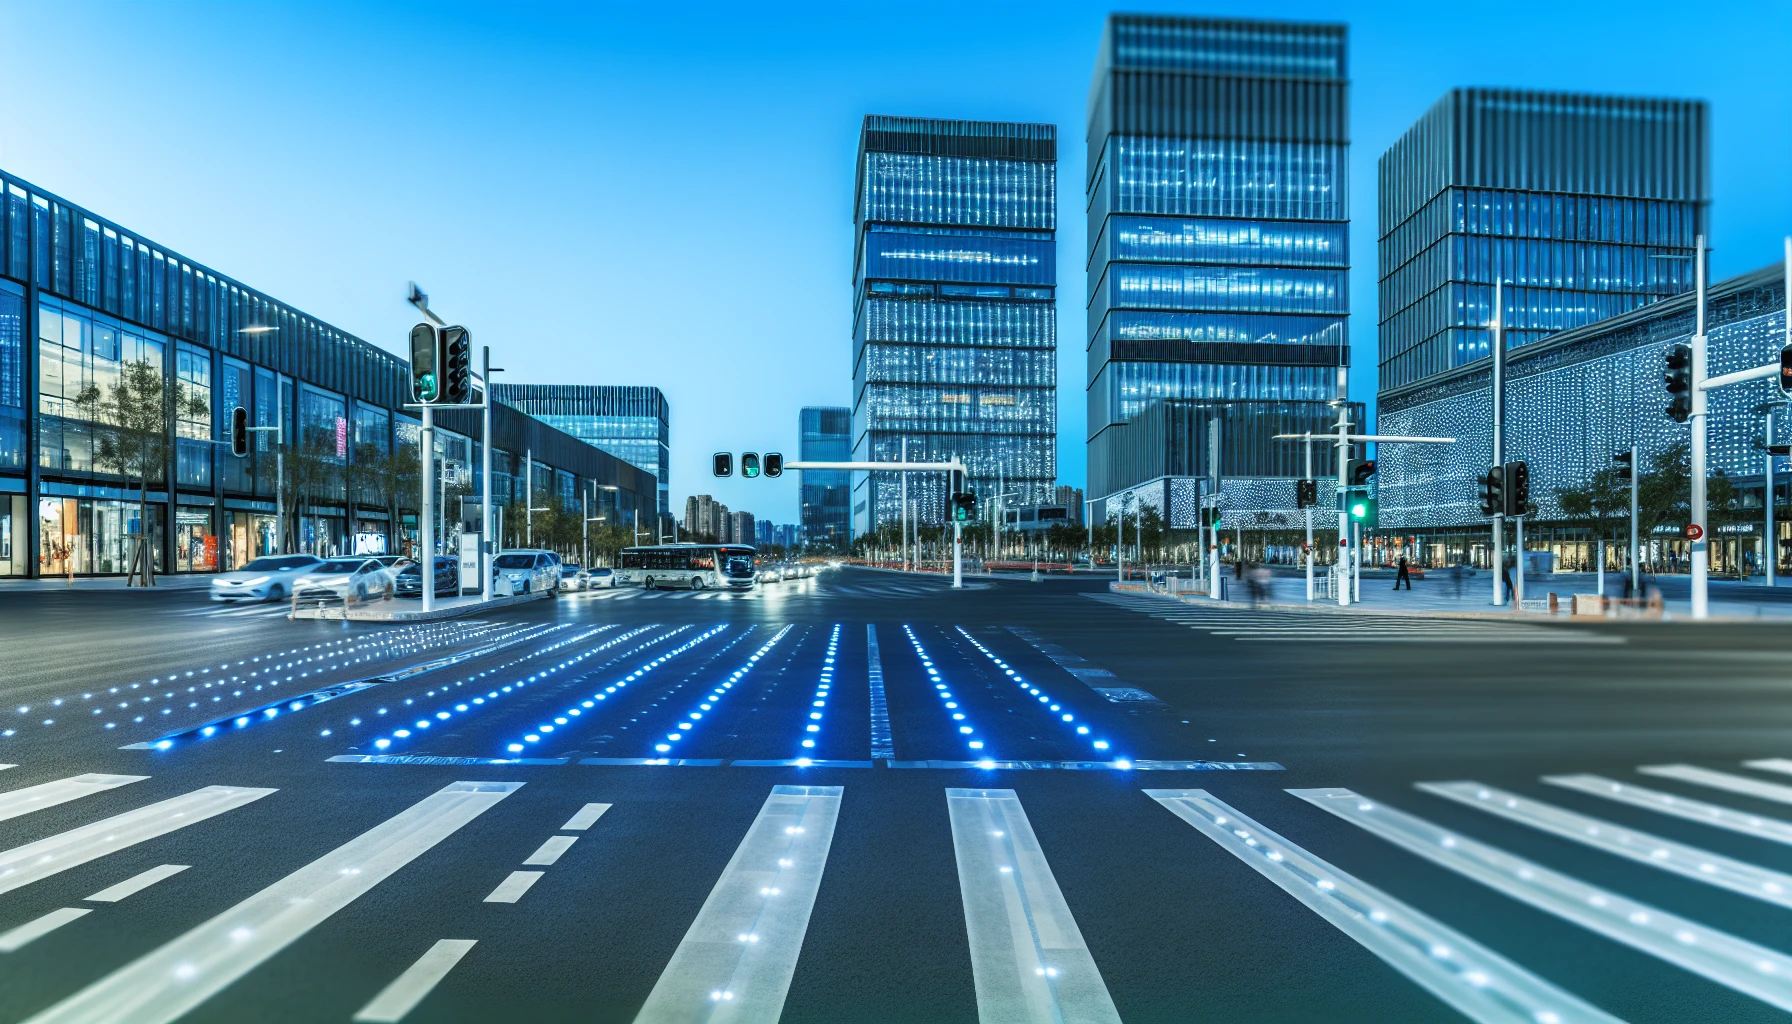 Smart city infrastructure and pedestrian safety